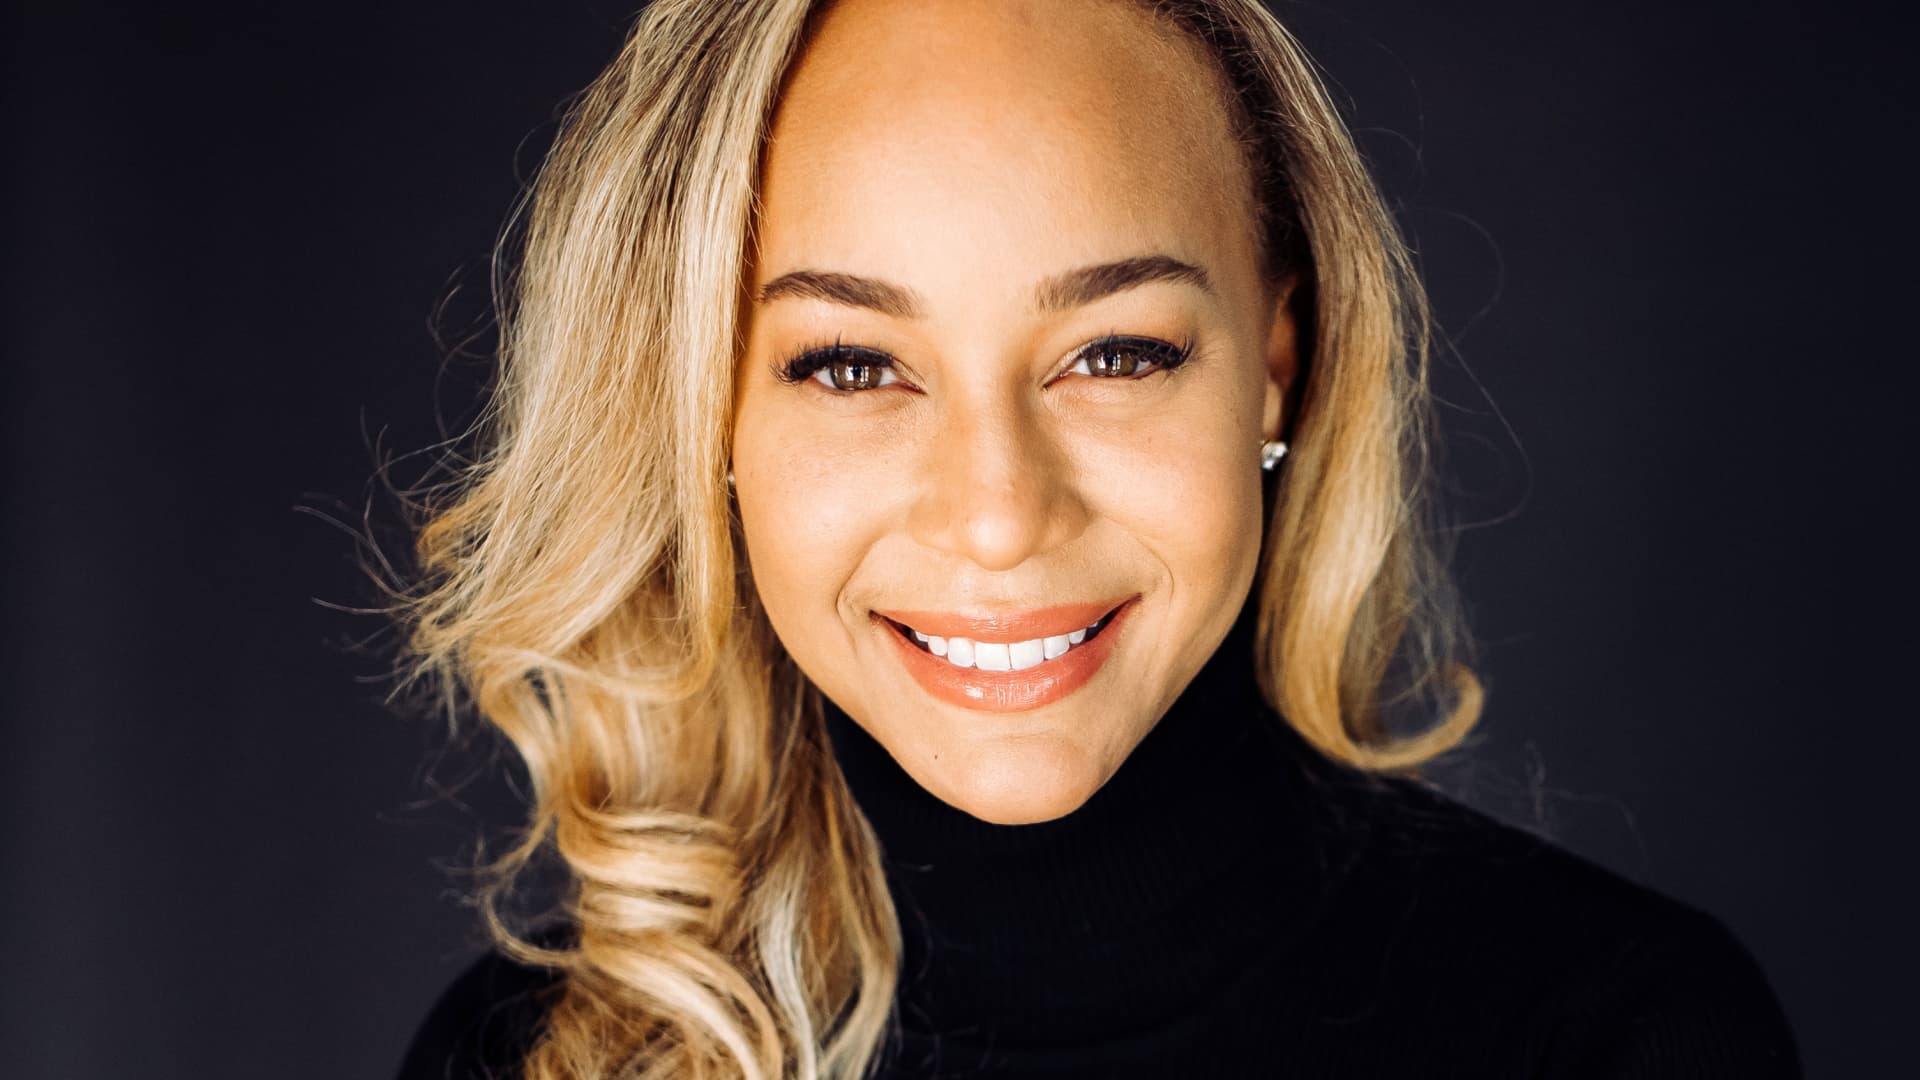 Morgan DeBaun, Founder and CEO of Blavity, behind AfroTech, 21Ninety, Travel Noire, Shadow and Act, and Blavity News.